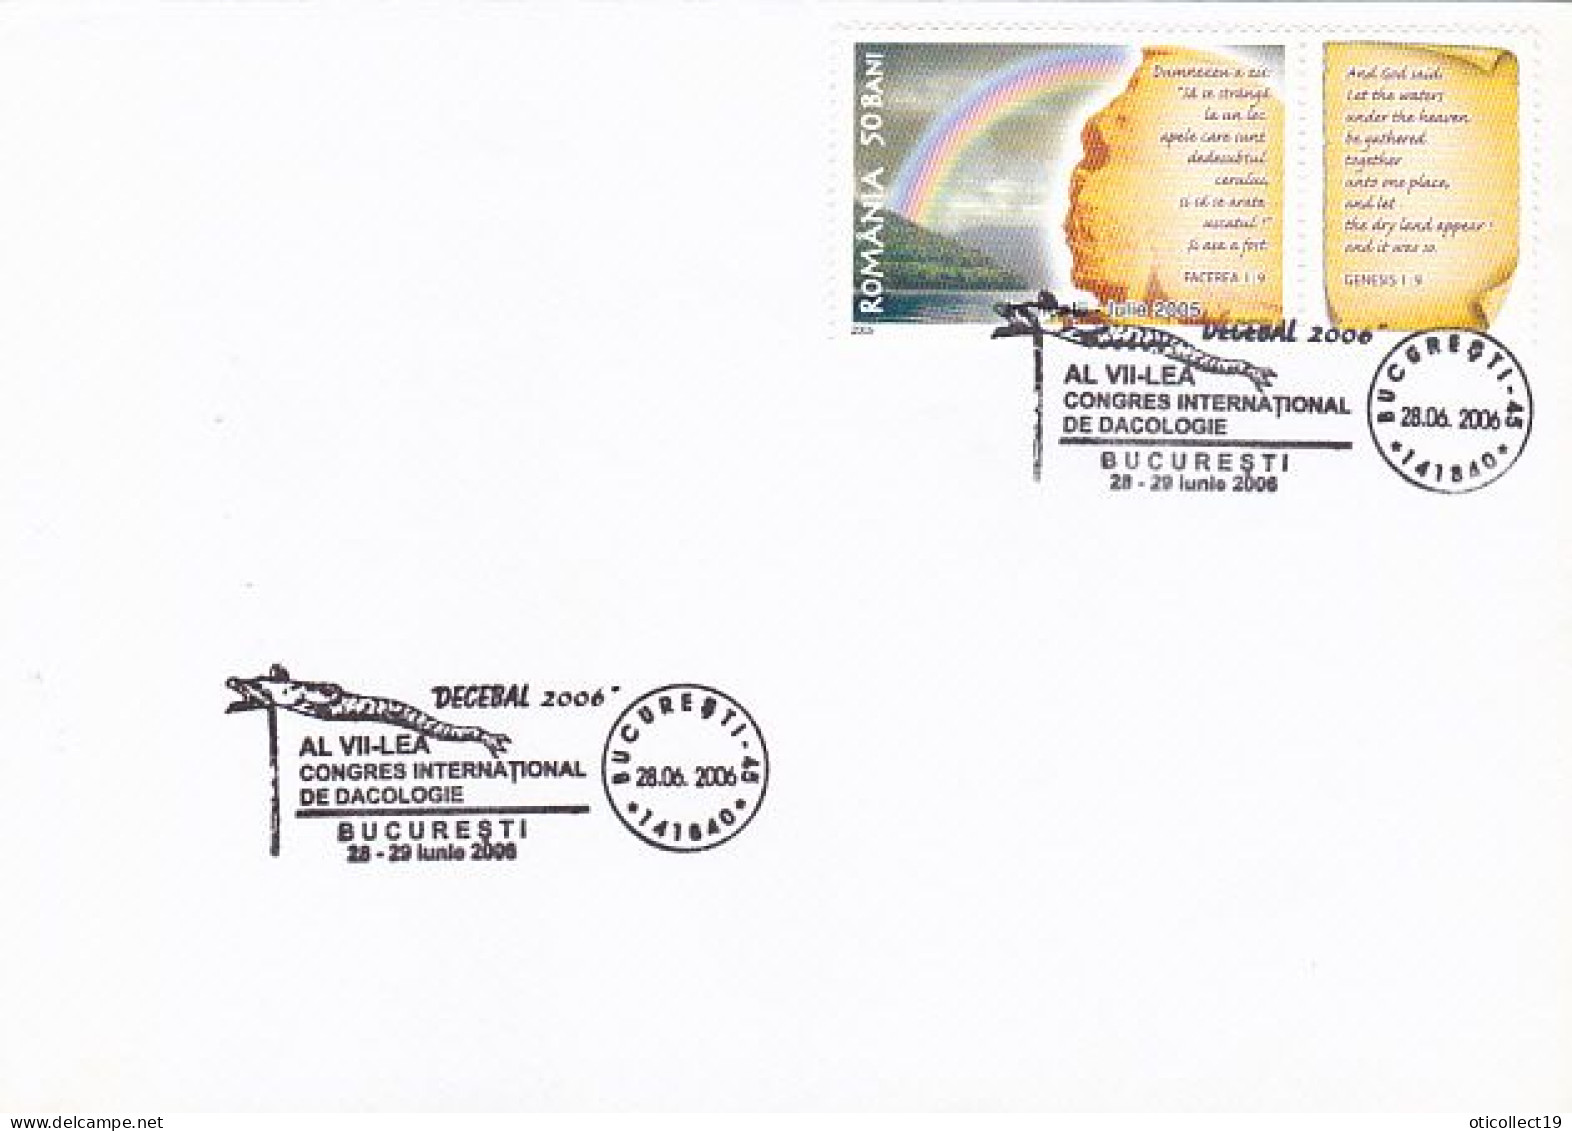 DACOLOGY INTERNATIONAL CONGRESS SPECIAL POSTMARKS, 2005 FLOODS RELIEF STAMP ON COVER, 2006, ROMANIA - Briefe U. Dokumente